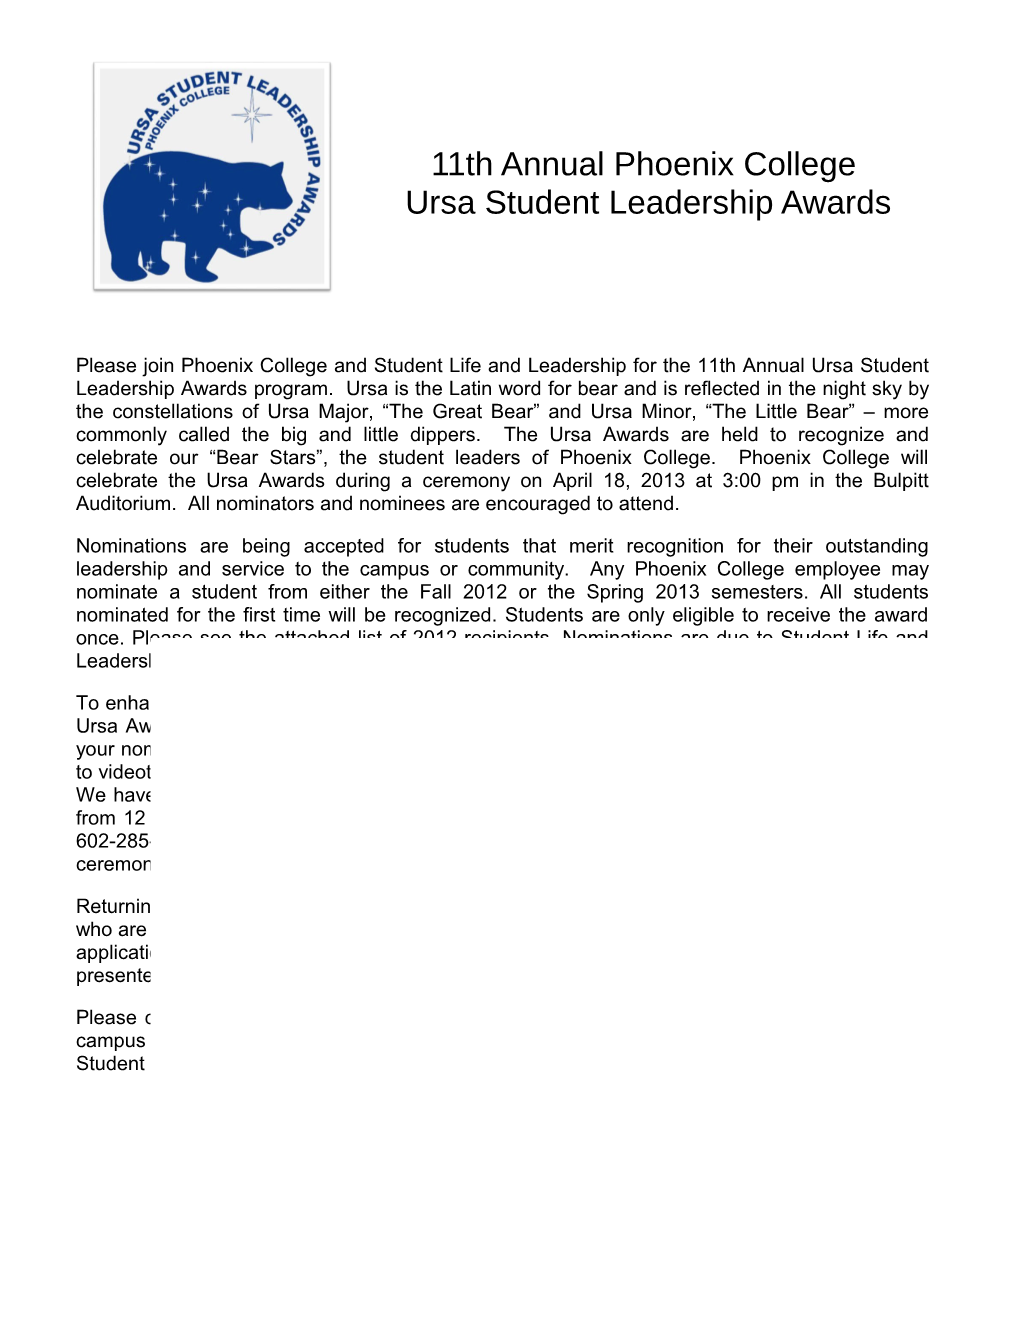 Please Join Phoenix College and Student Life and Leadership for the 11Th Annual Ursa Student